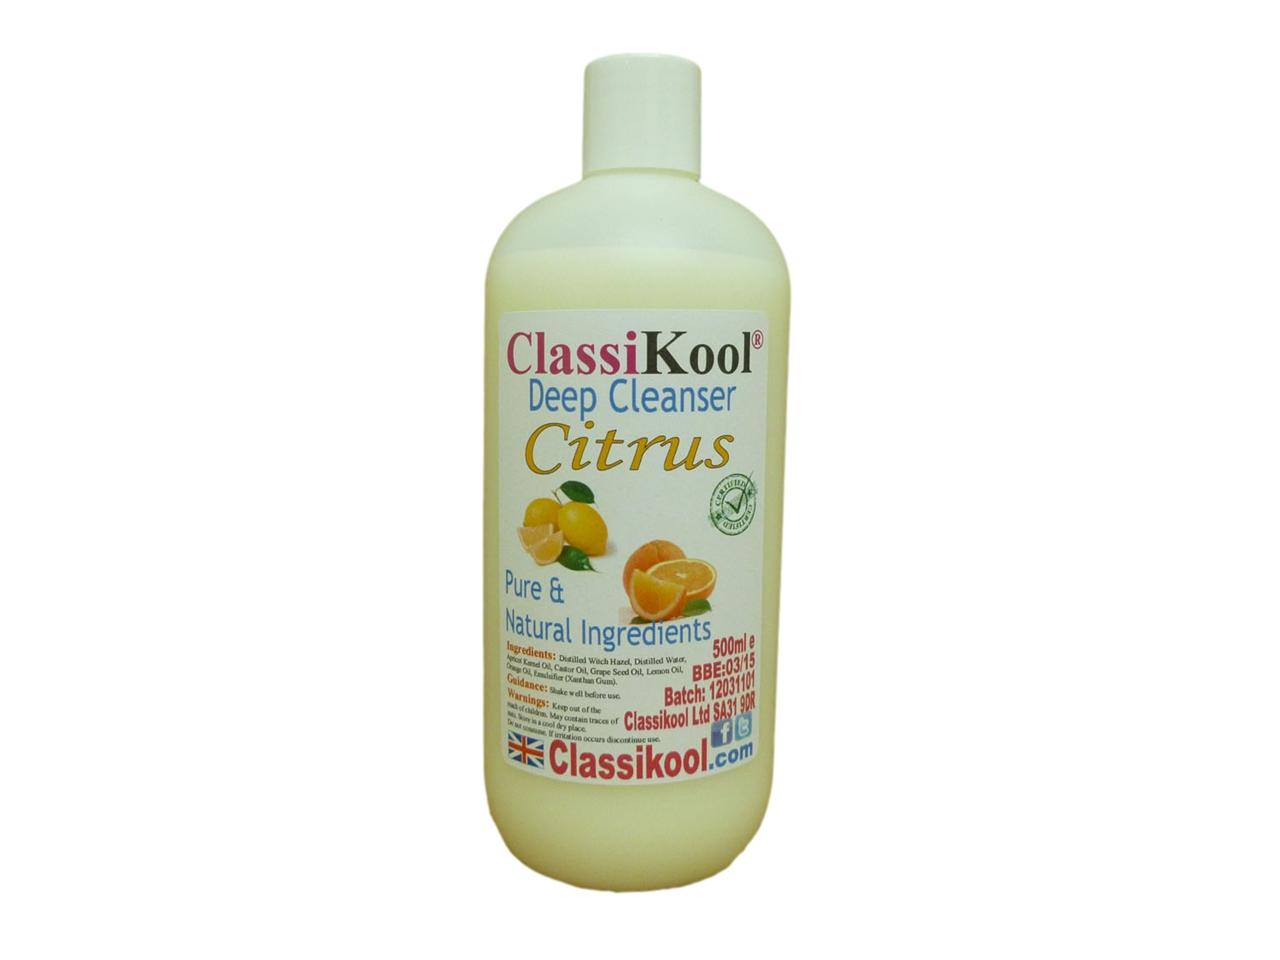 Classikool Natural Face Cleanser: A Gentle Pore Cleansing Liquid ...
